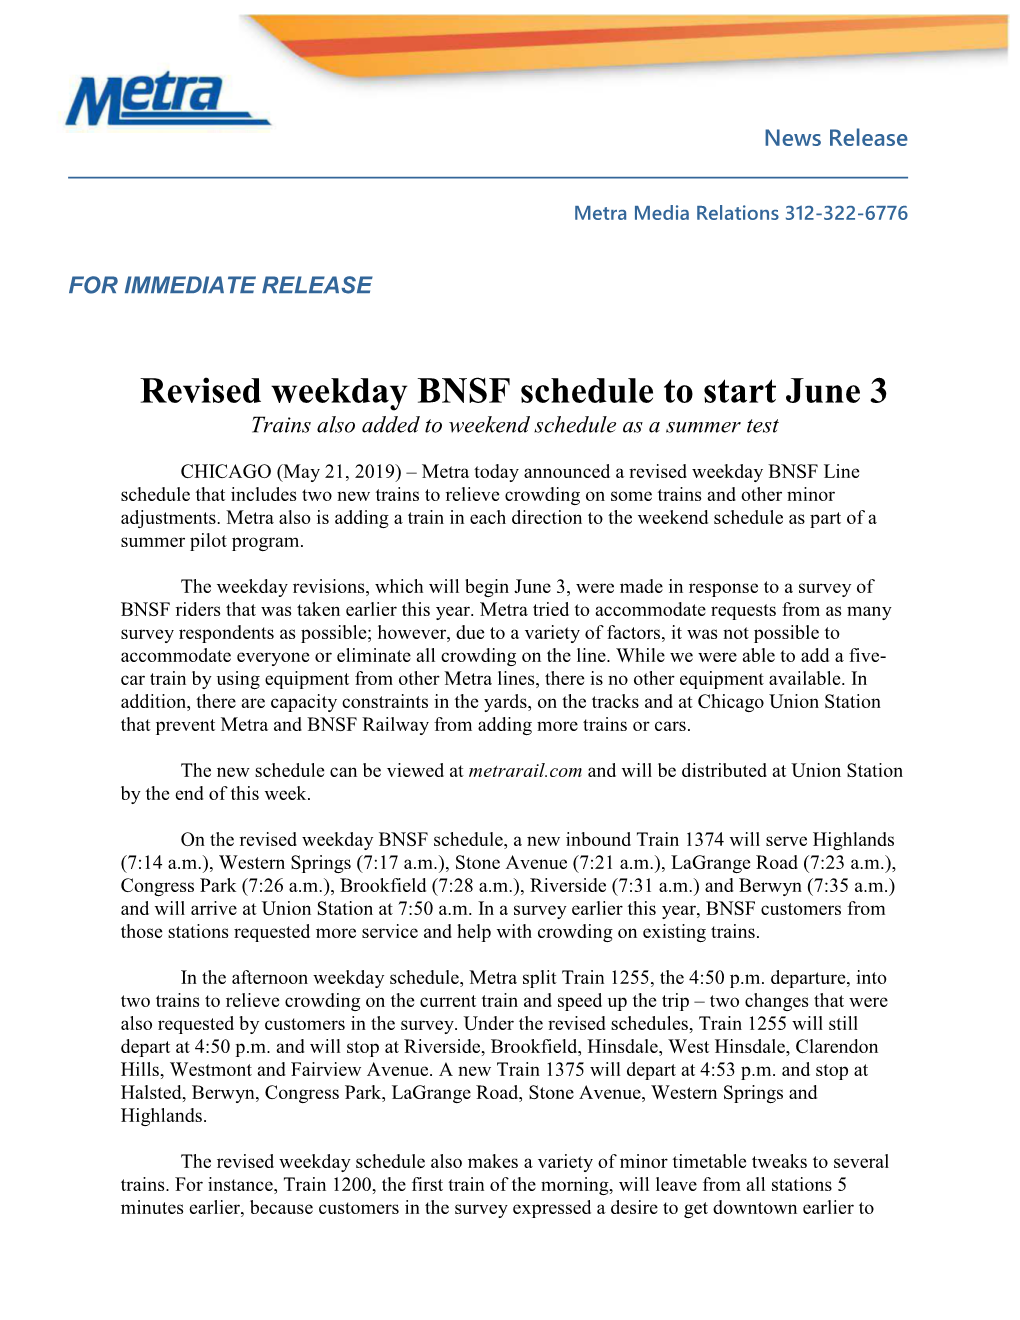 Revised Weekday BNSF Schedule to Start June 3 Trains Also Added to Weekend Schedule As a Summer Test